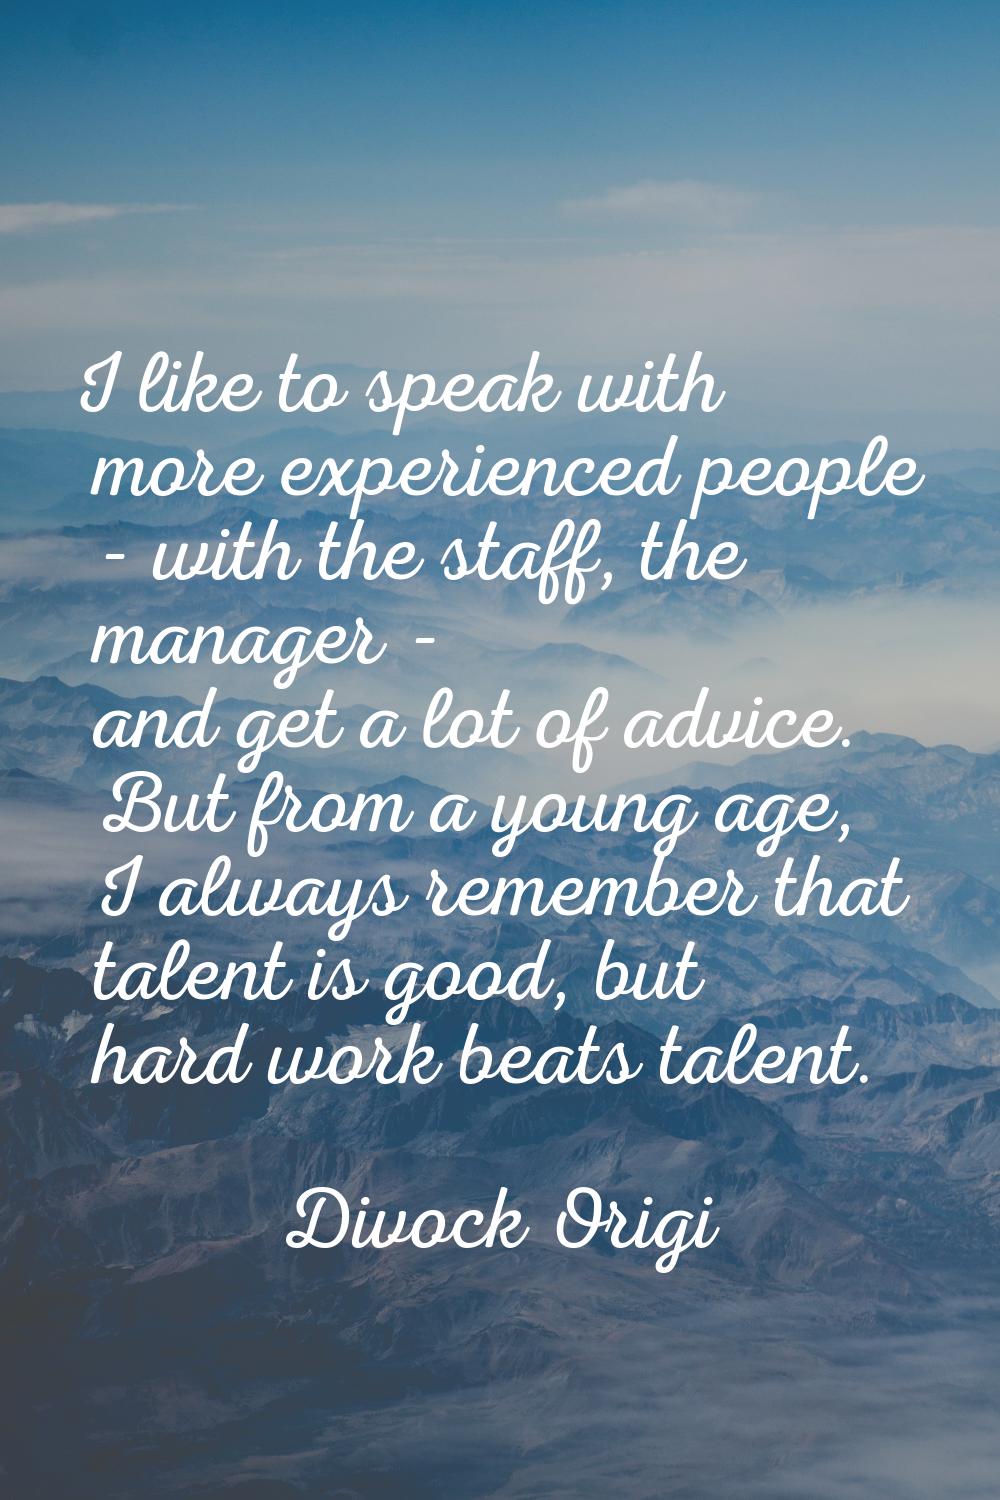 I like to speak with more experienced people - with the staff, the manager - and get a lot of advic